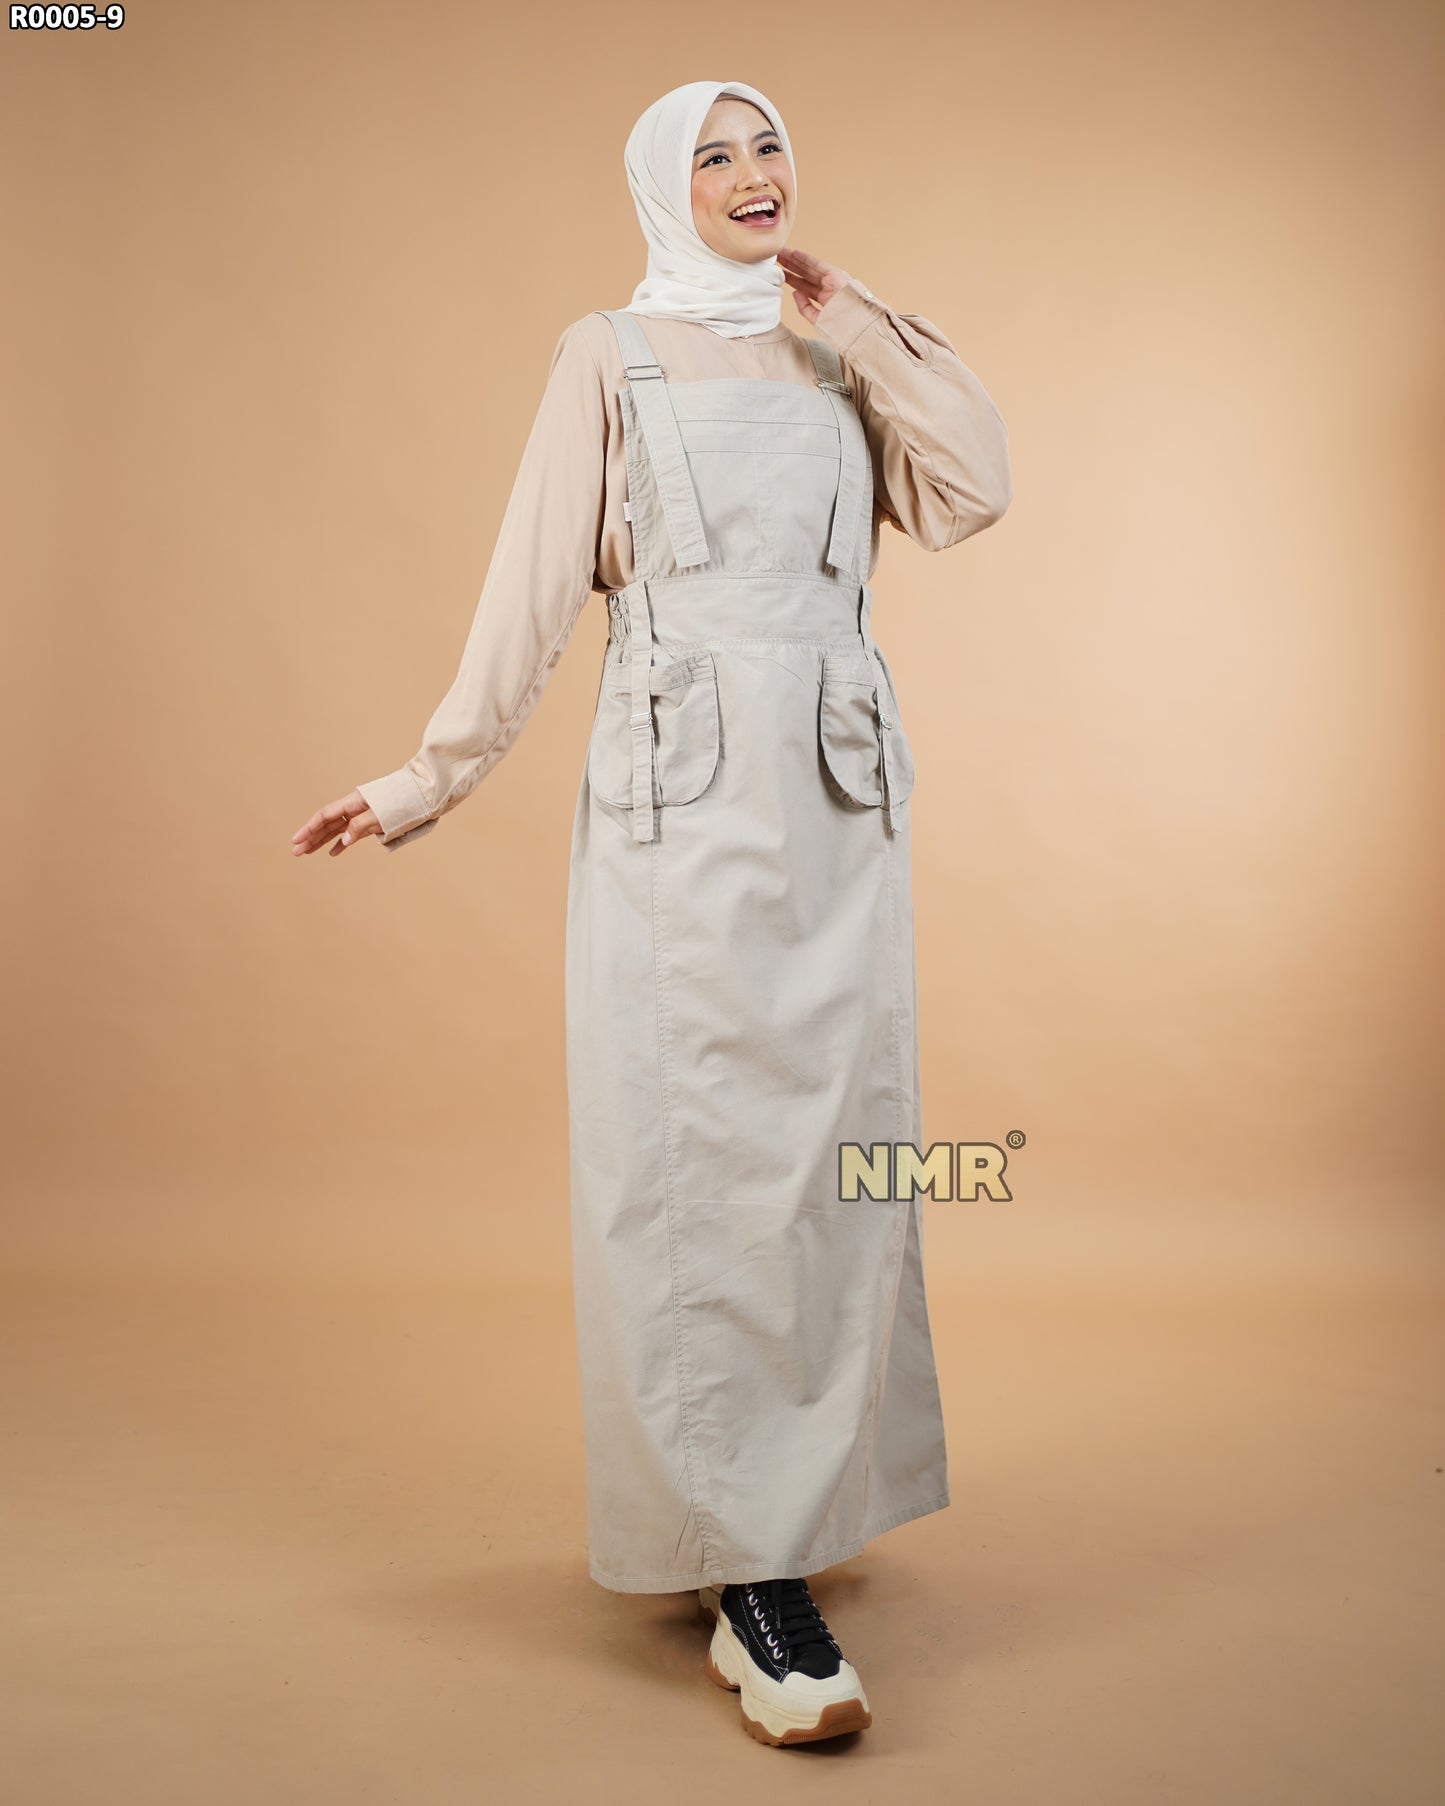 NMR Gamis Jumpsuit Overall Baby Canvas Vol R0005-9